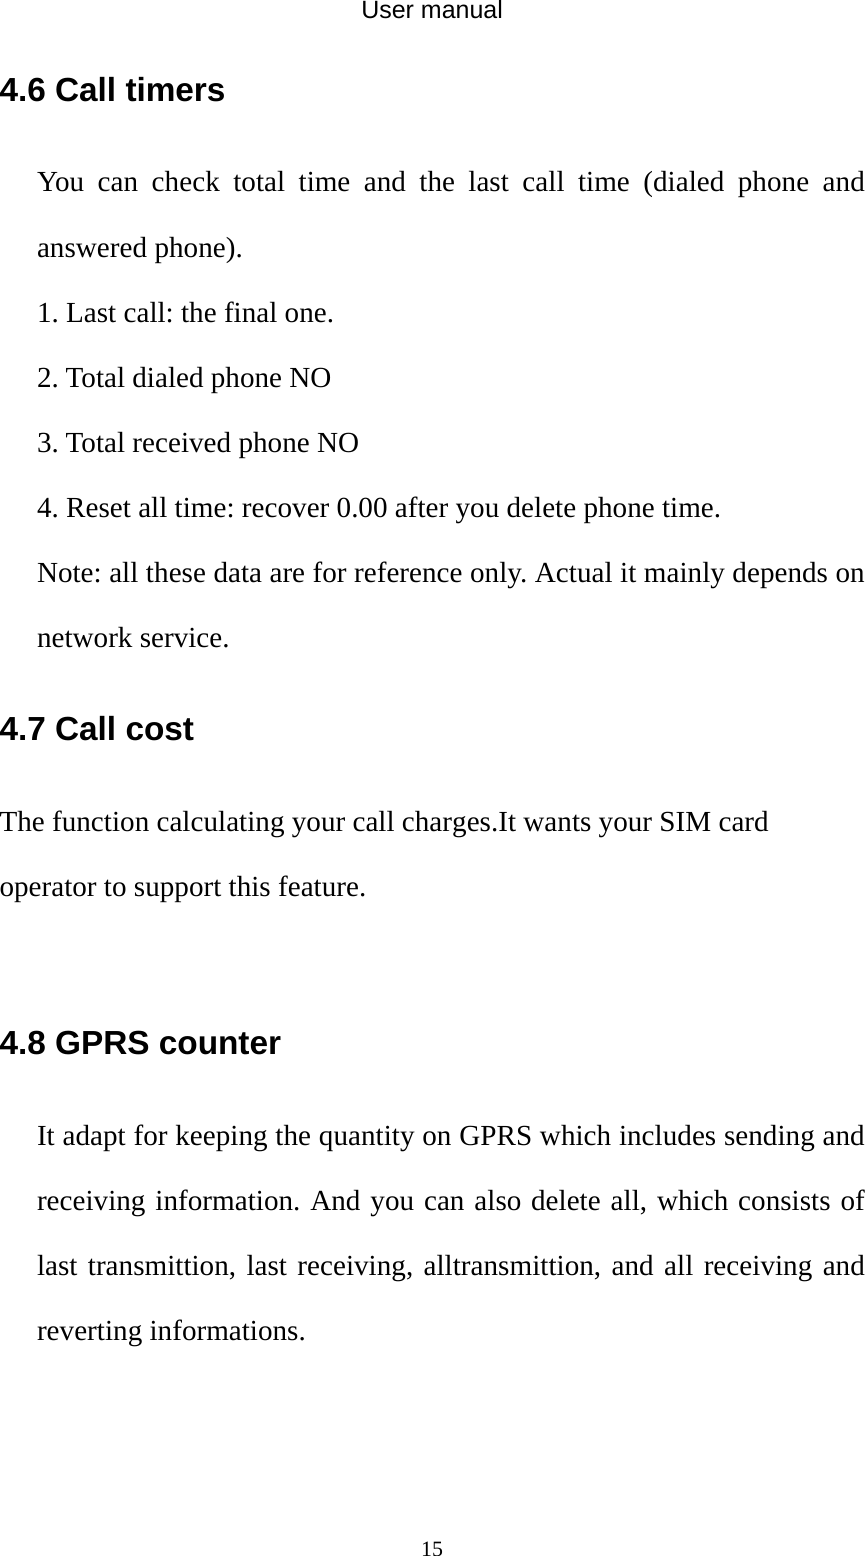 User manual  154.6 Call timers You can check total time and the last call time (dialed phone and answered phone). 1. Last call: the final one. 2. Total dialed phone NO 3. Total received phone NO 4. Reset all time: recover 0.00 after you delete phone time. Note: all these data are for reference only. Actual it mainly depends on network service. 4.7 Call cost The function calculating your call charges.It wants your SIM card operator to support this feature.  4.8 GPRS counter It adapt for keeping the quantity on GPRS which includes sending and receiving information. And you can also delete all, which consists of last transmittion, last receiving, alltransmittion, and all receiving and reverting informations.     